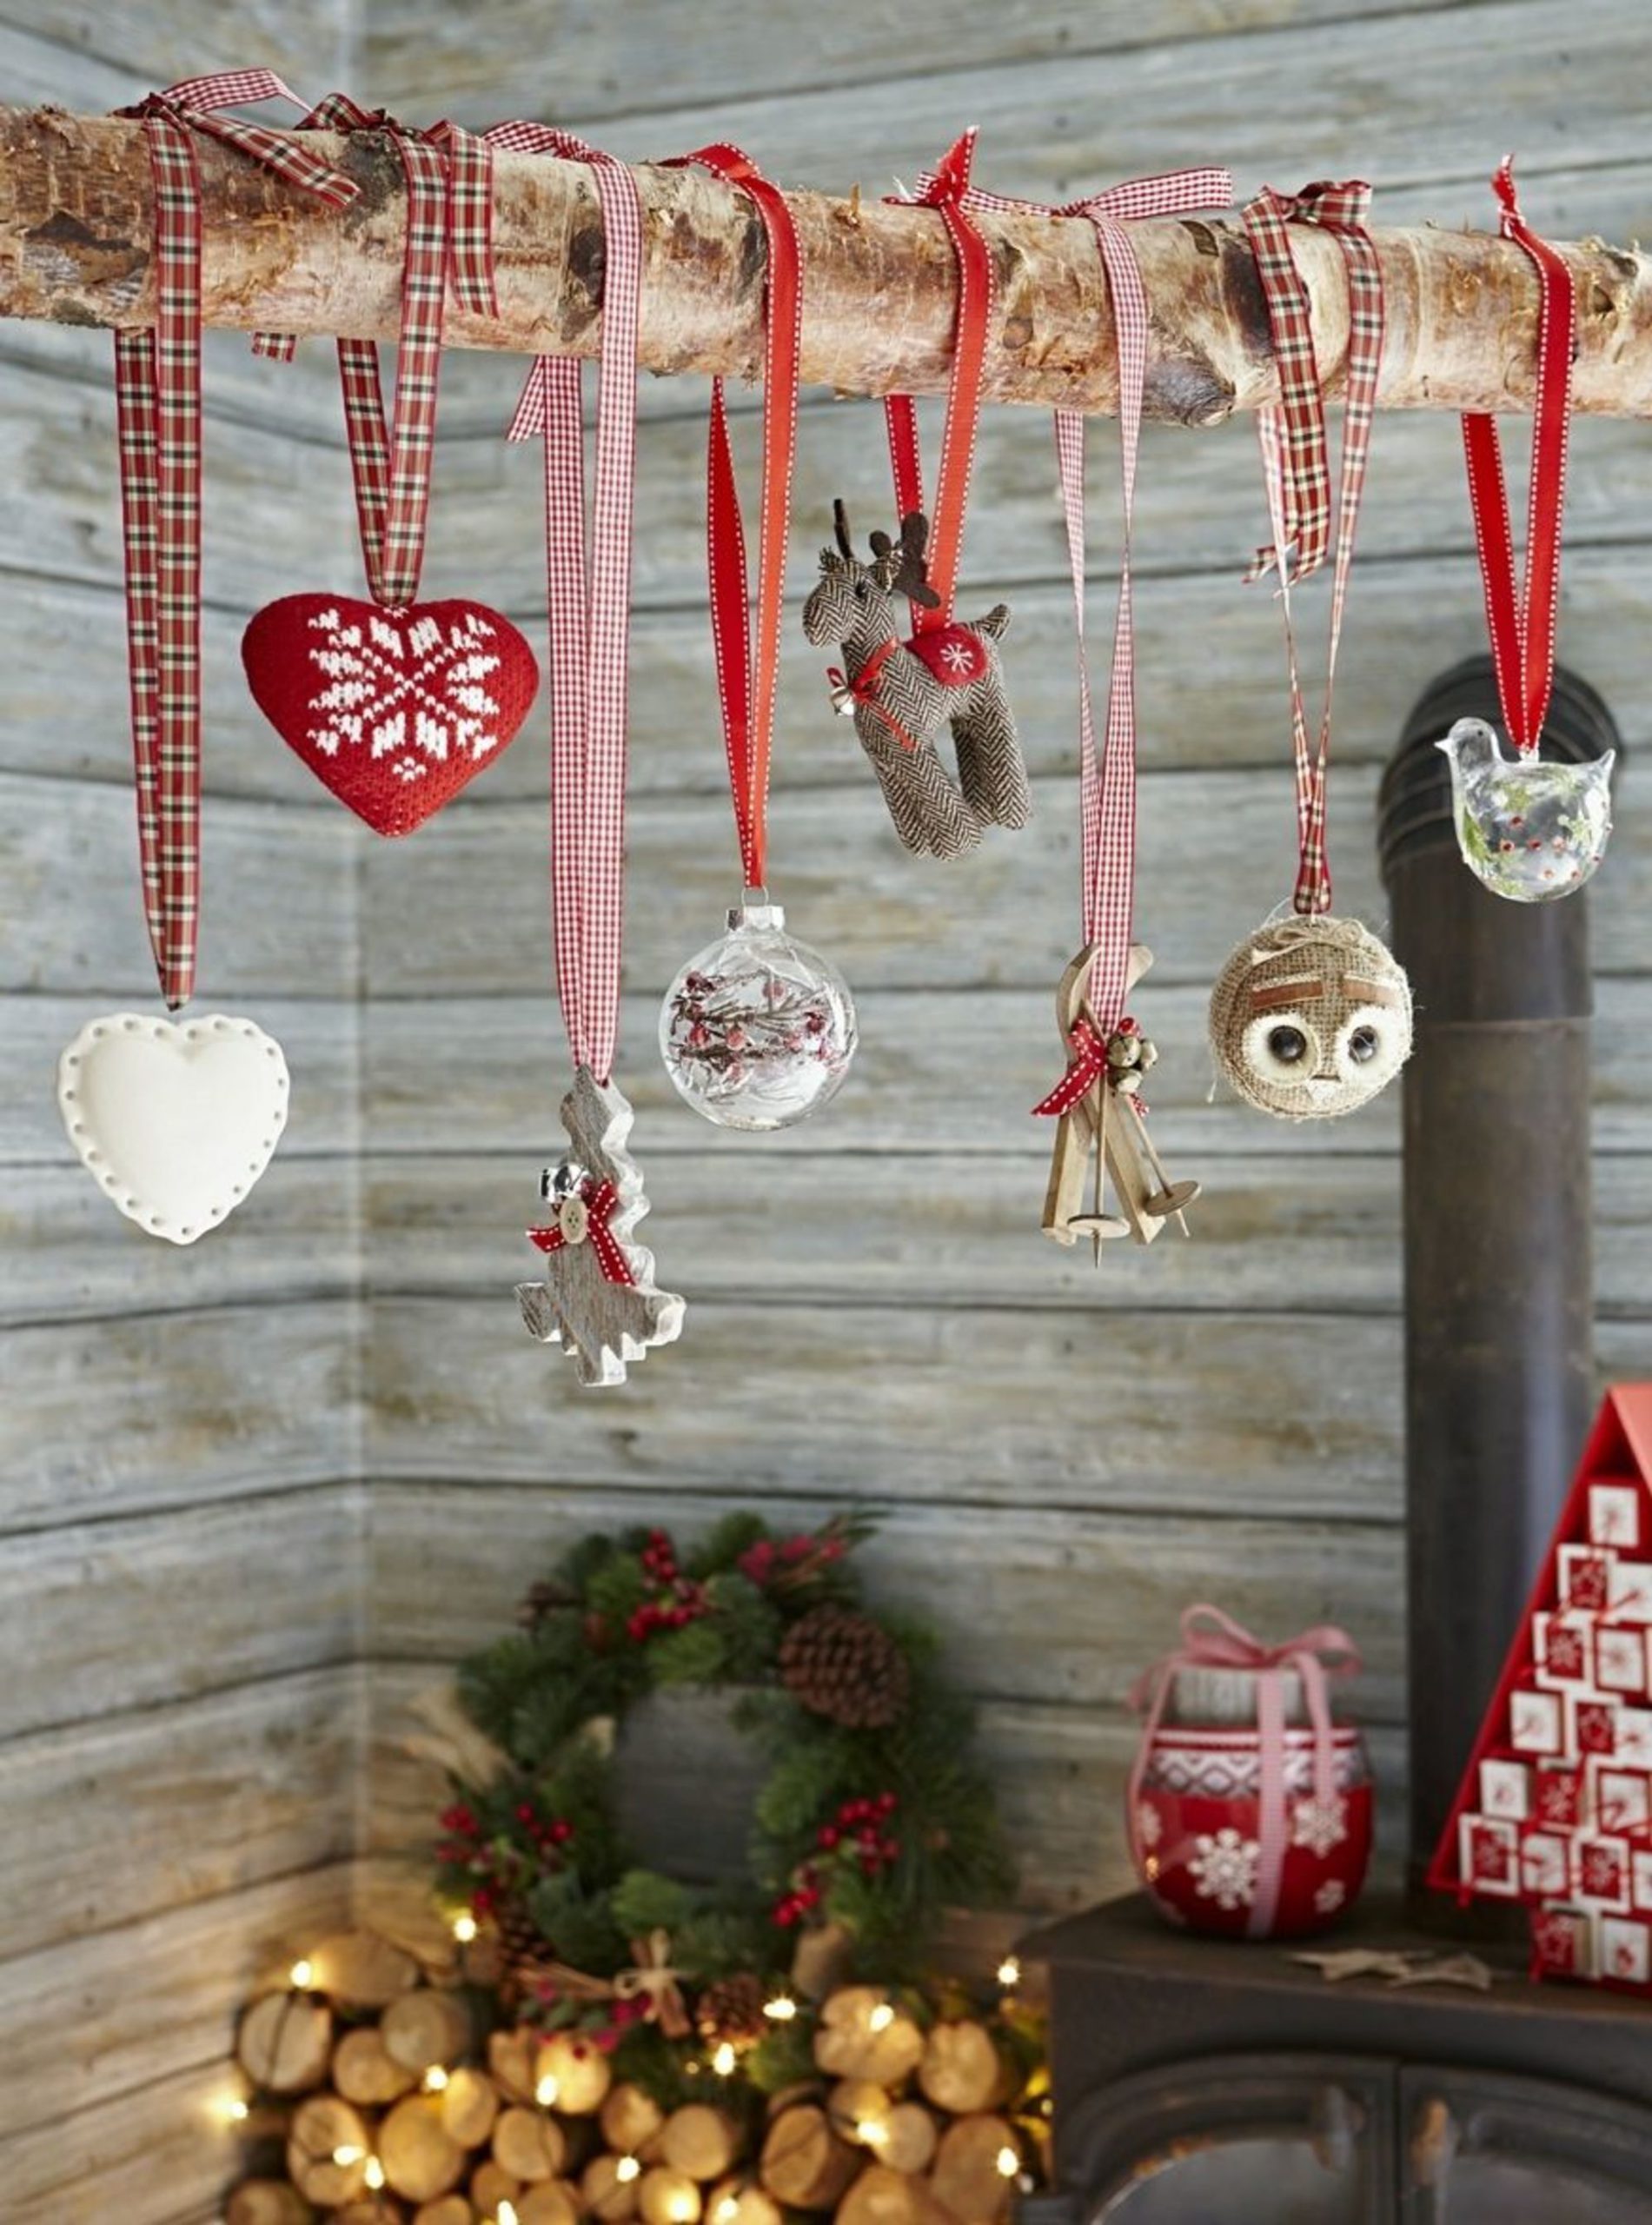 Use Ribbons as Christmas Decorations